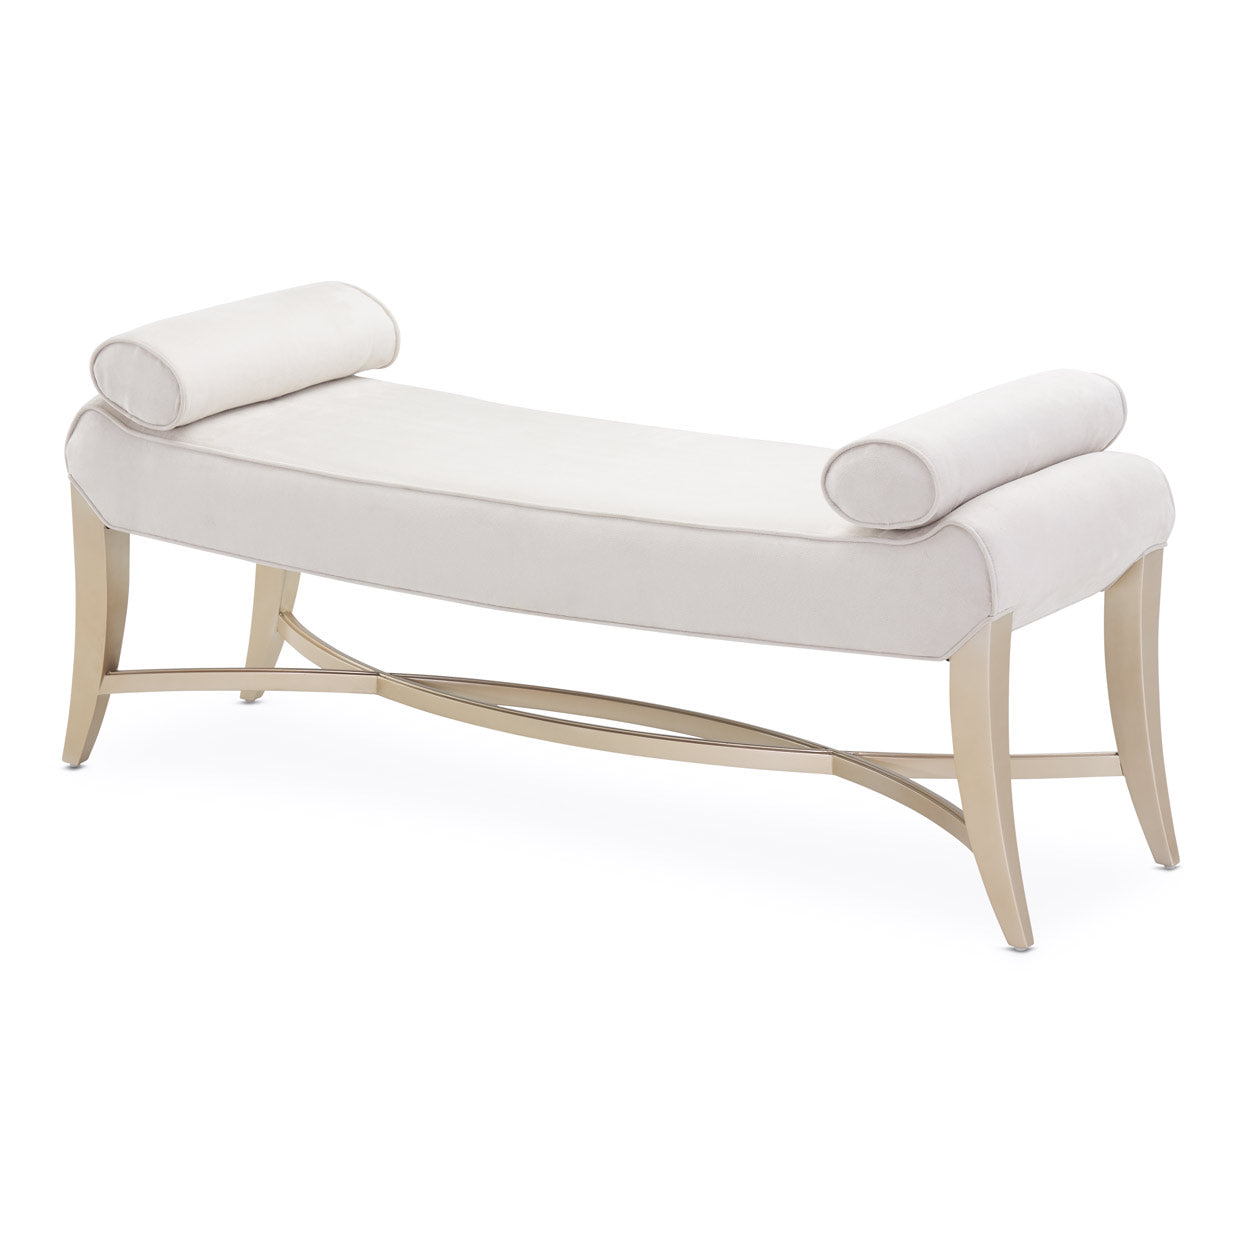 Malibu Crest Bed Bench, Classic silhouette, Modern luxury, Bedroom seating, Soft neutrals, Club chair silhouette, Faux suede upholstery, Doeskin color, Chardonnay finish, Bedroom furniture, dream art, Michael amini